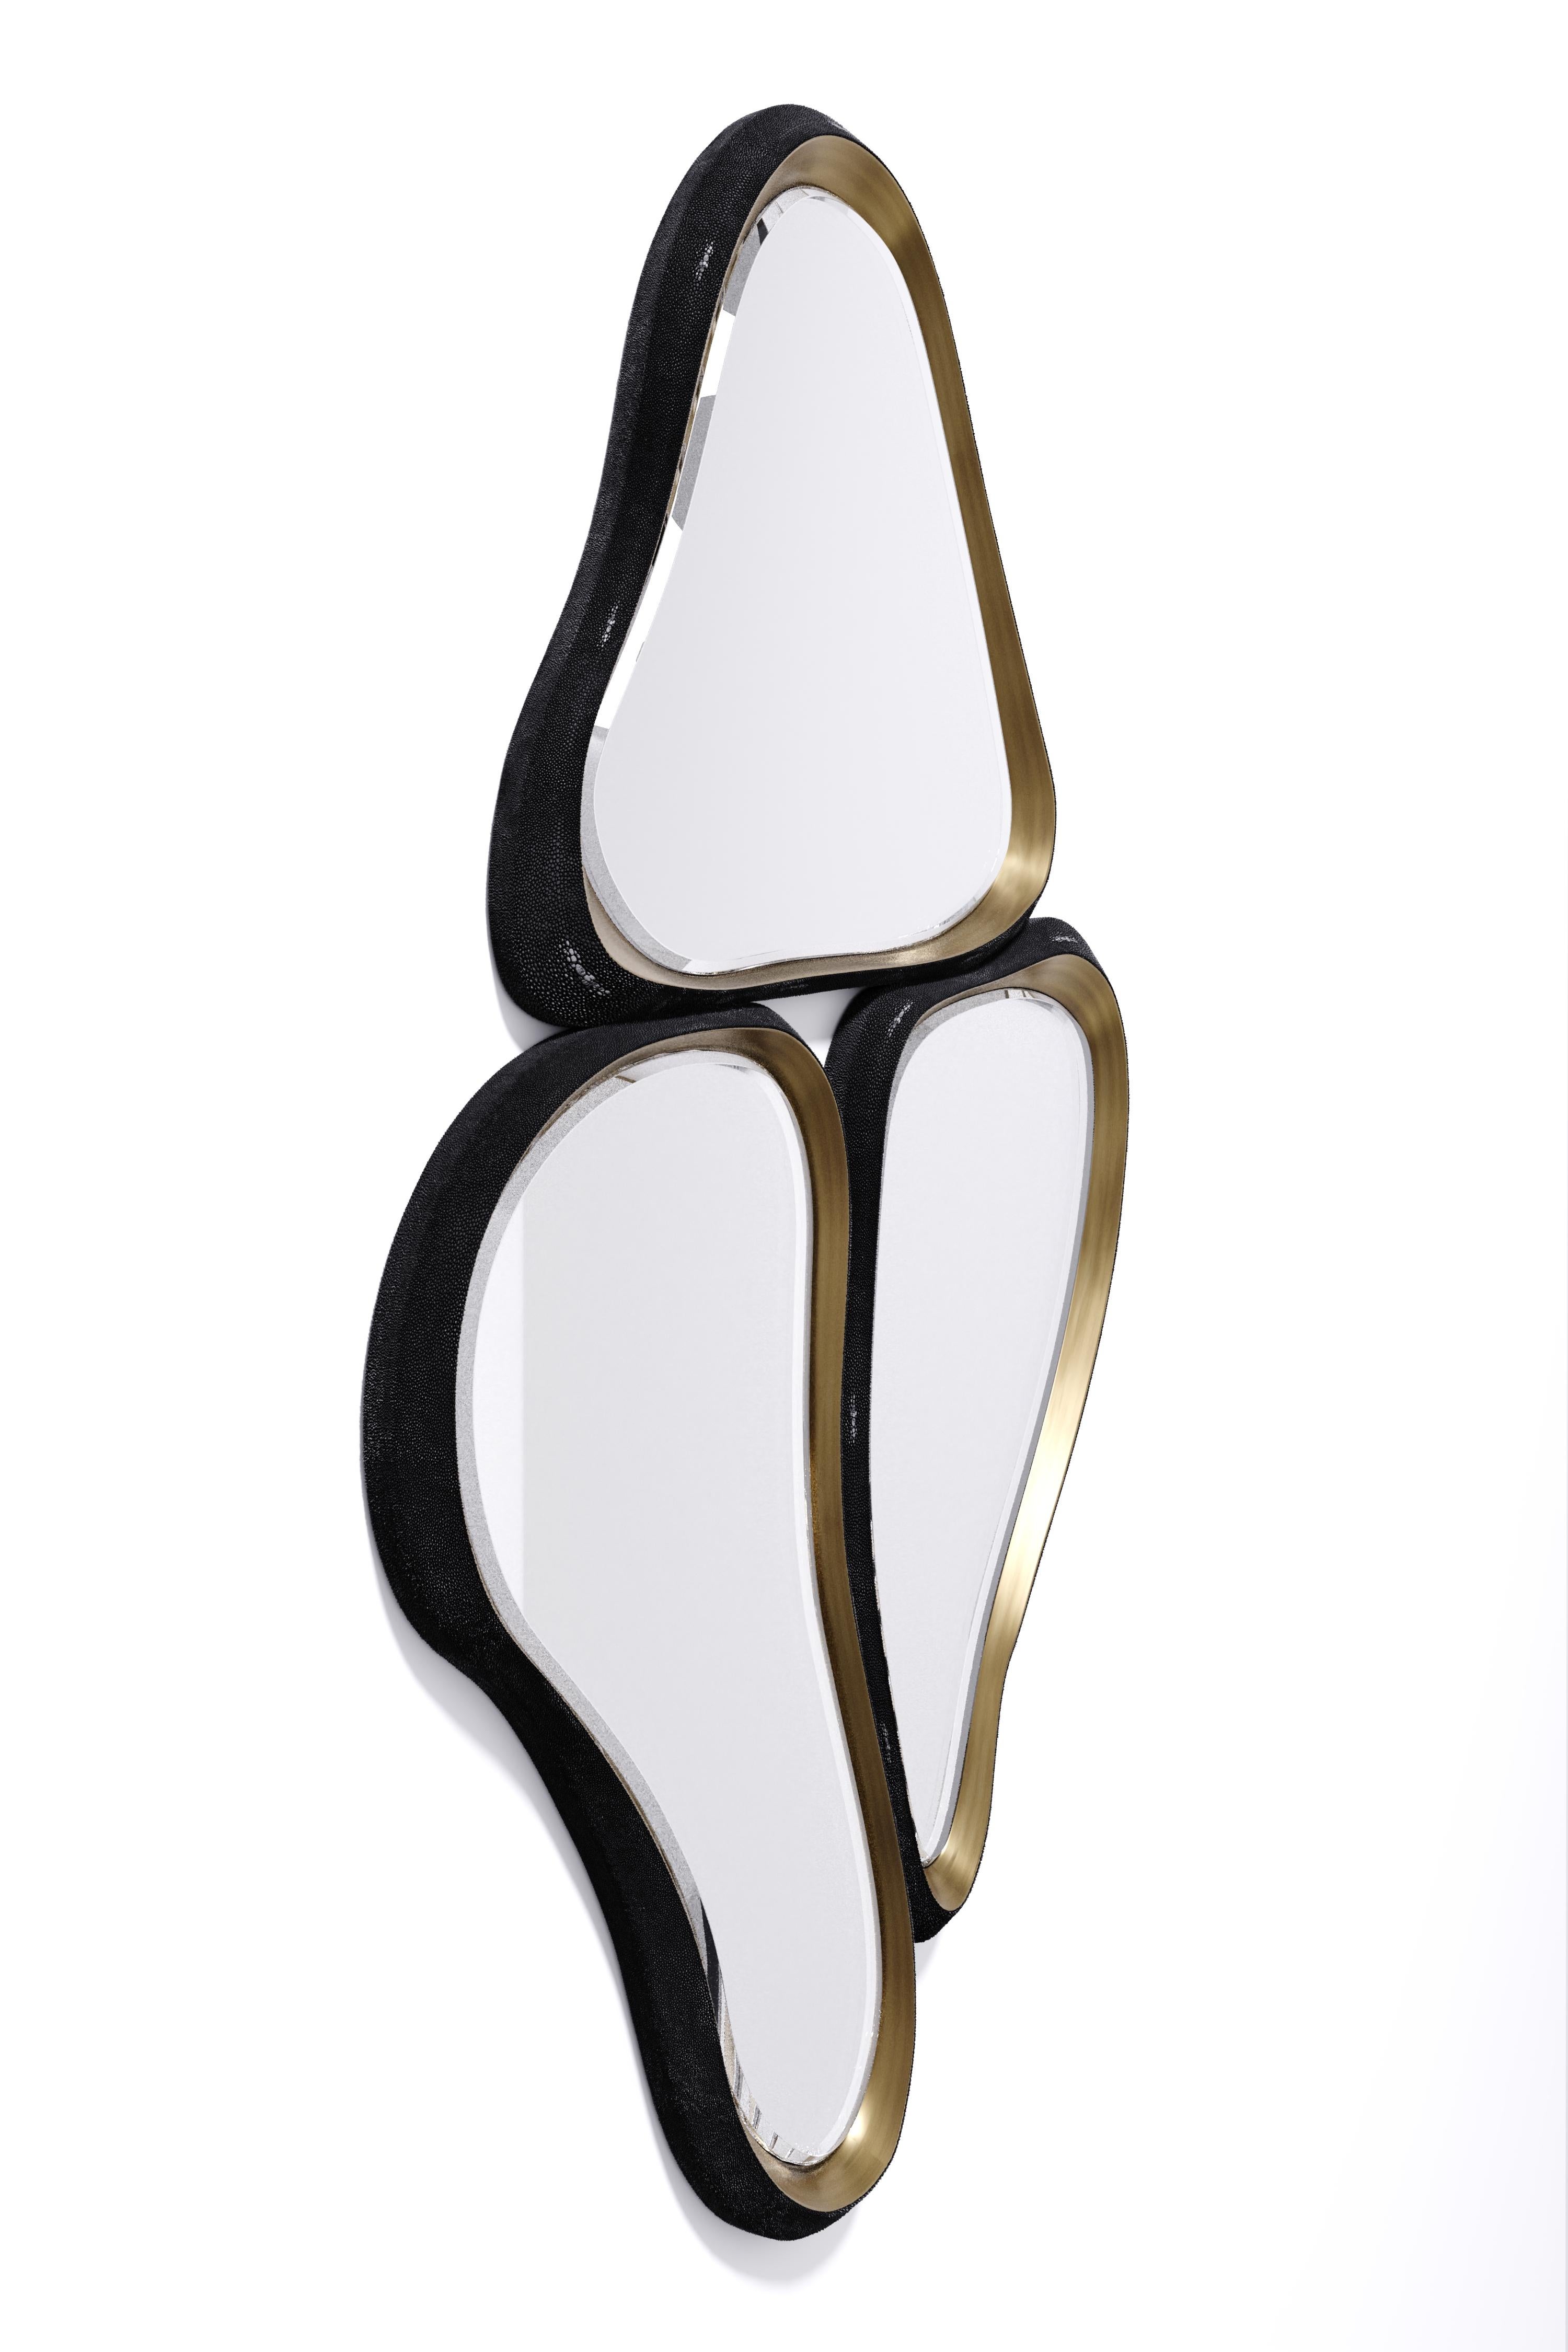 Sculptural Mirror in Cream Shagreen and Bronze-Patina Brass by Kifu Paris For Sale 1